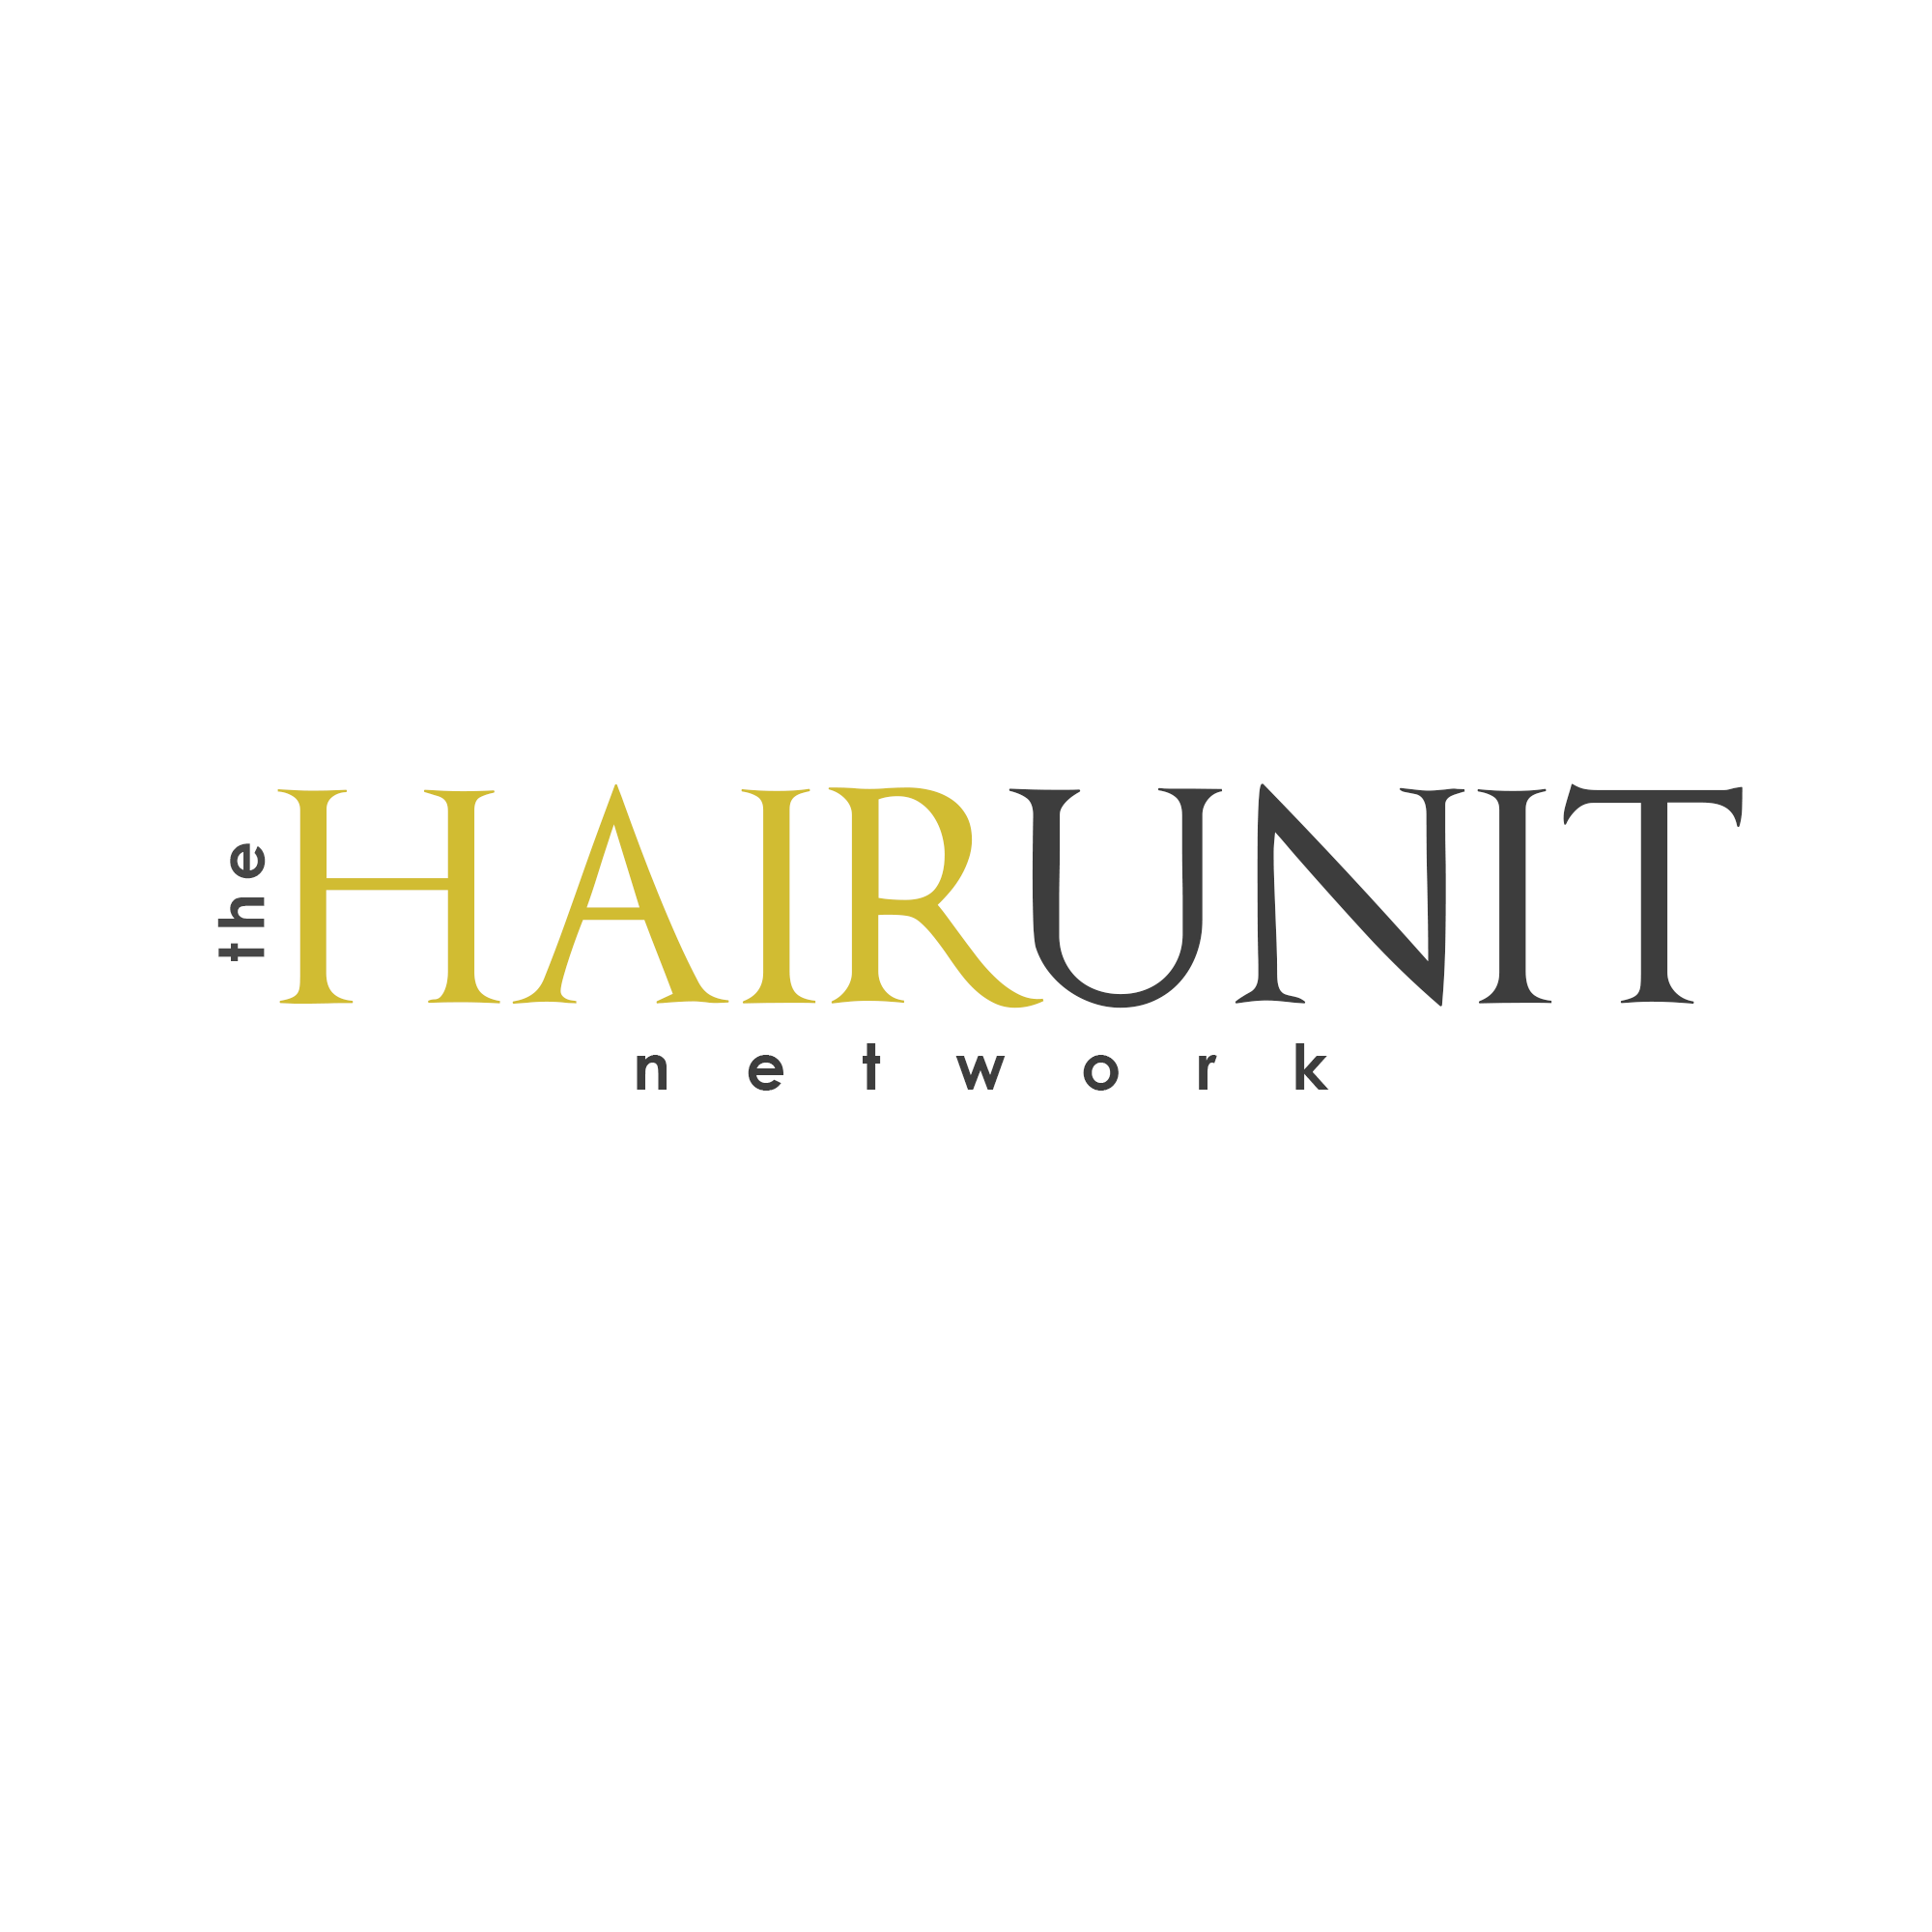 WELCOME TO THE HAIR UNIT NETWORK